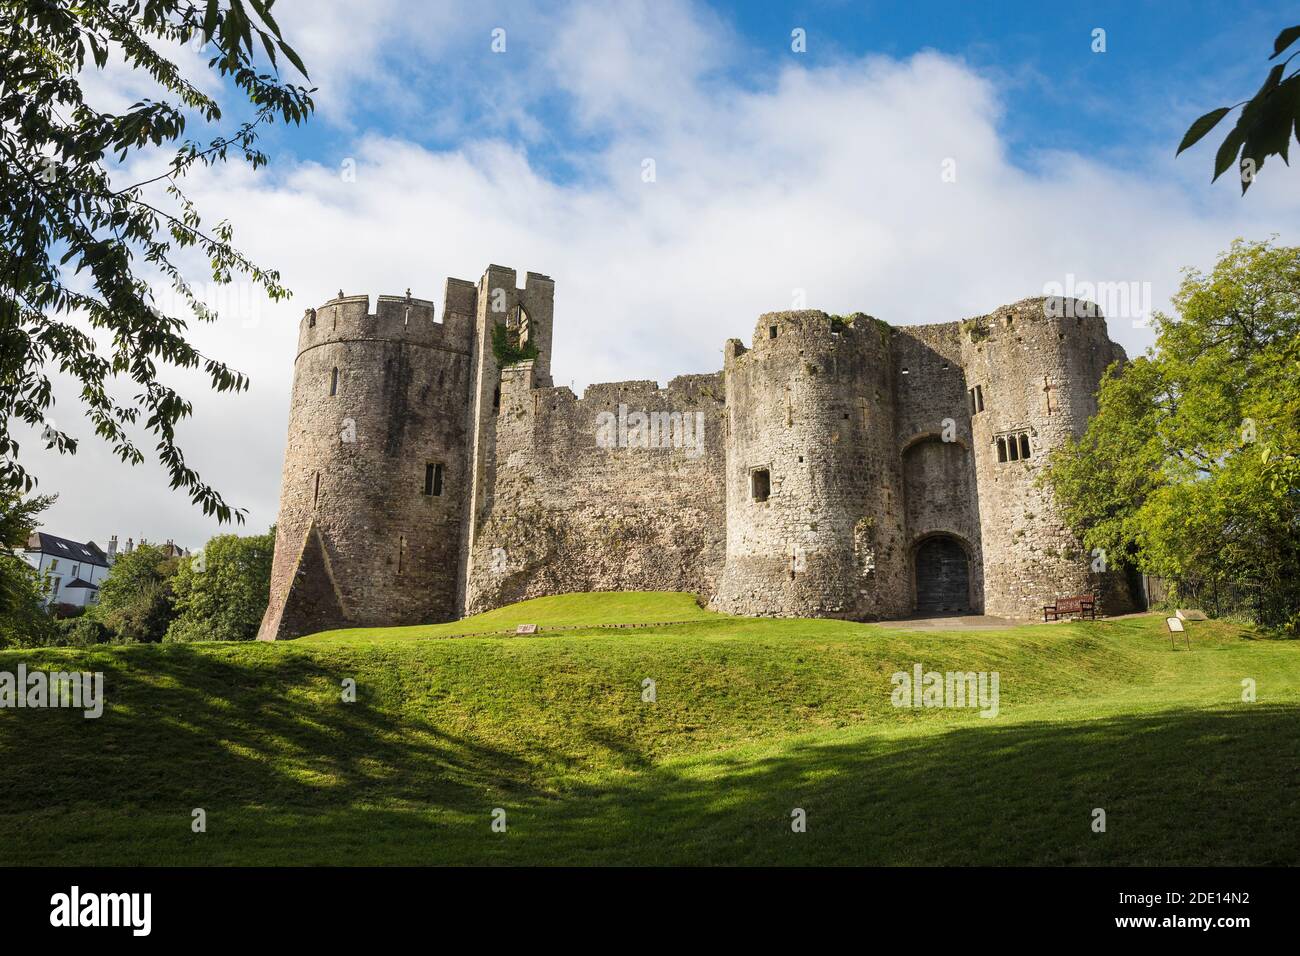 Chepstow Castle, Chepstow, Monmouthshire, Wales, United Kingdom, Europe Stock Photo